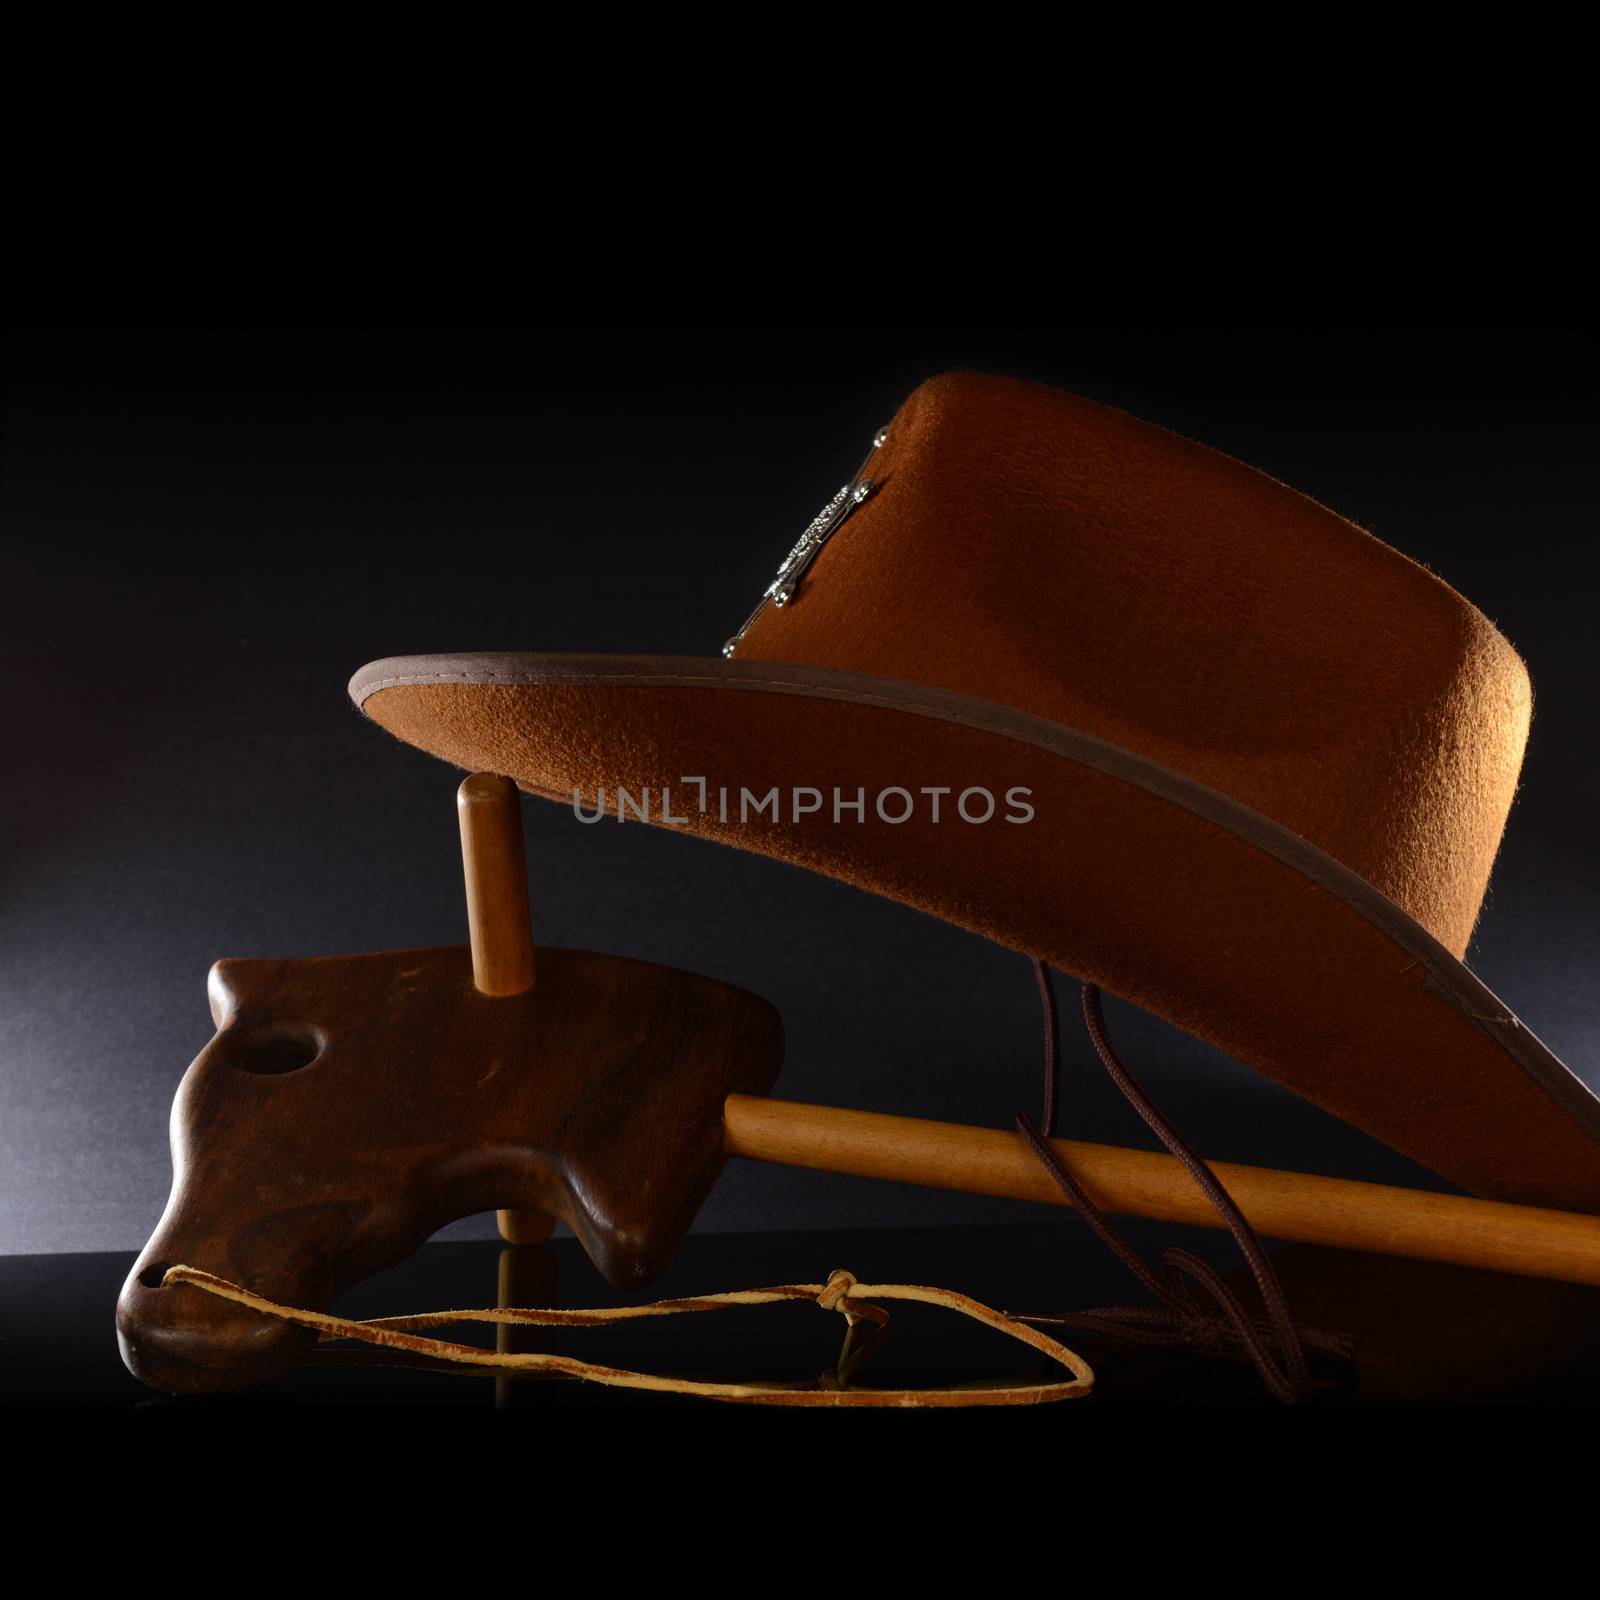 A wooden horse and hat for a playful cowboy theme.